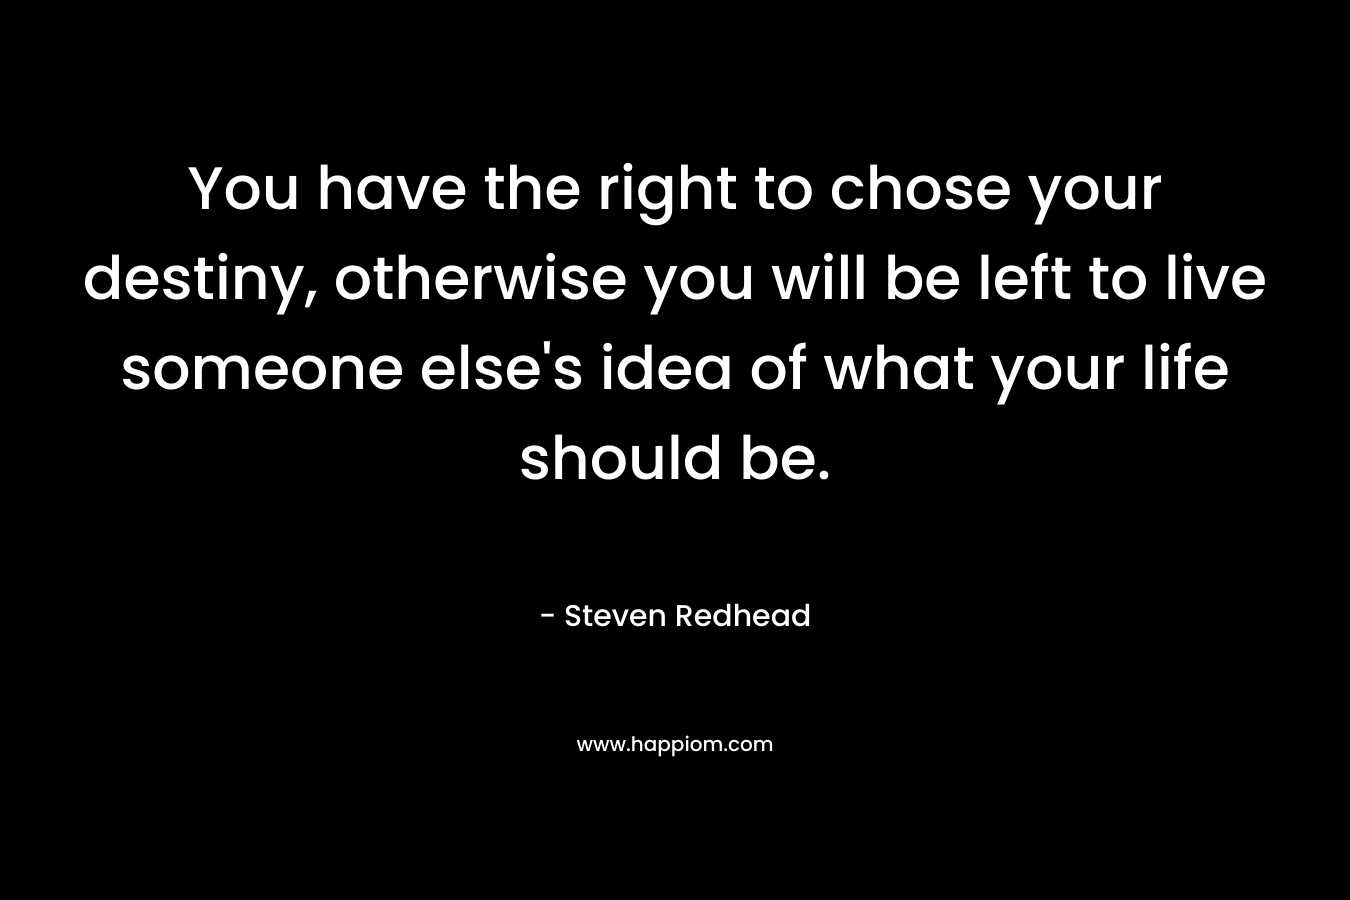 You have the right to chose your destiny, otherwise you will be left to live someone else's idea of what your life should be.